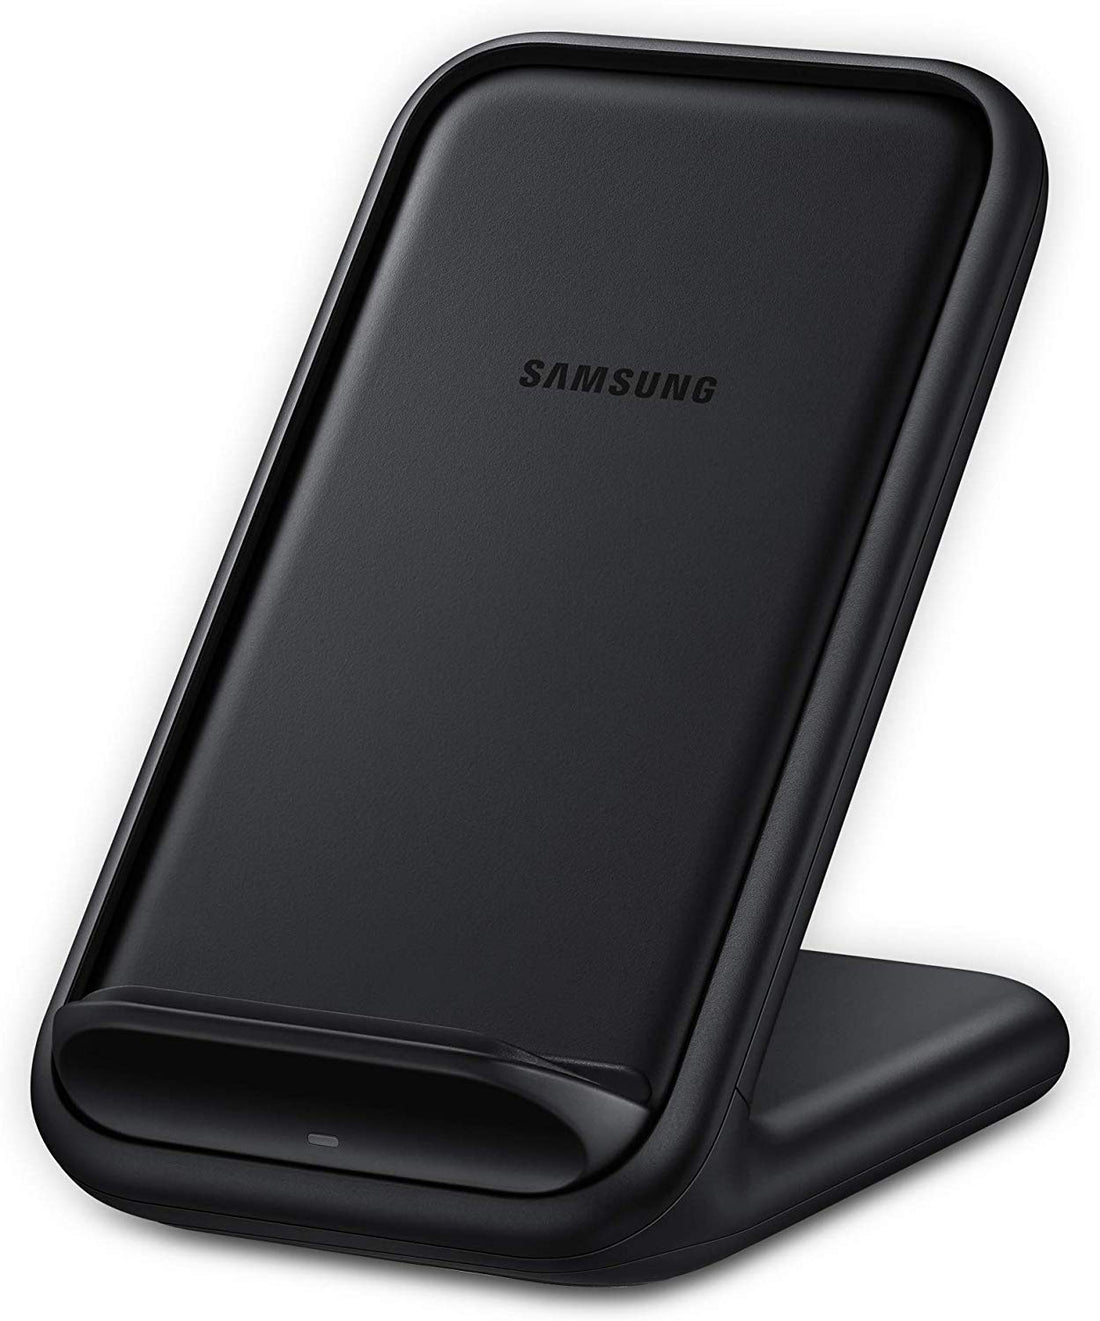 Samsung Fast Charge 2.0 Wireless Charger Stand for Galaxy Note10, S10 - Black (Refurbished)